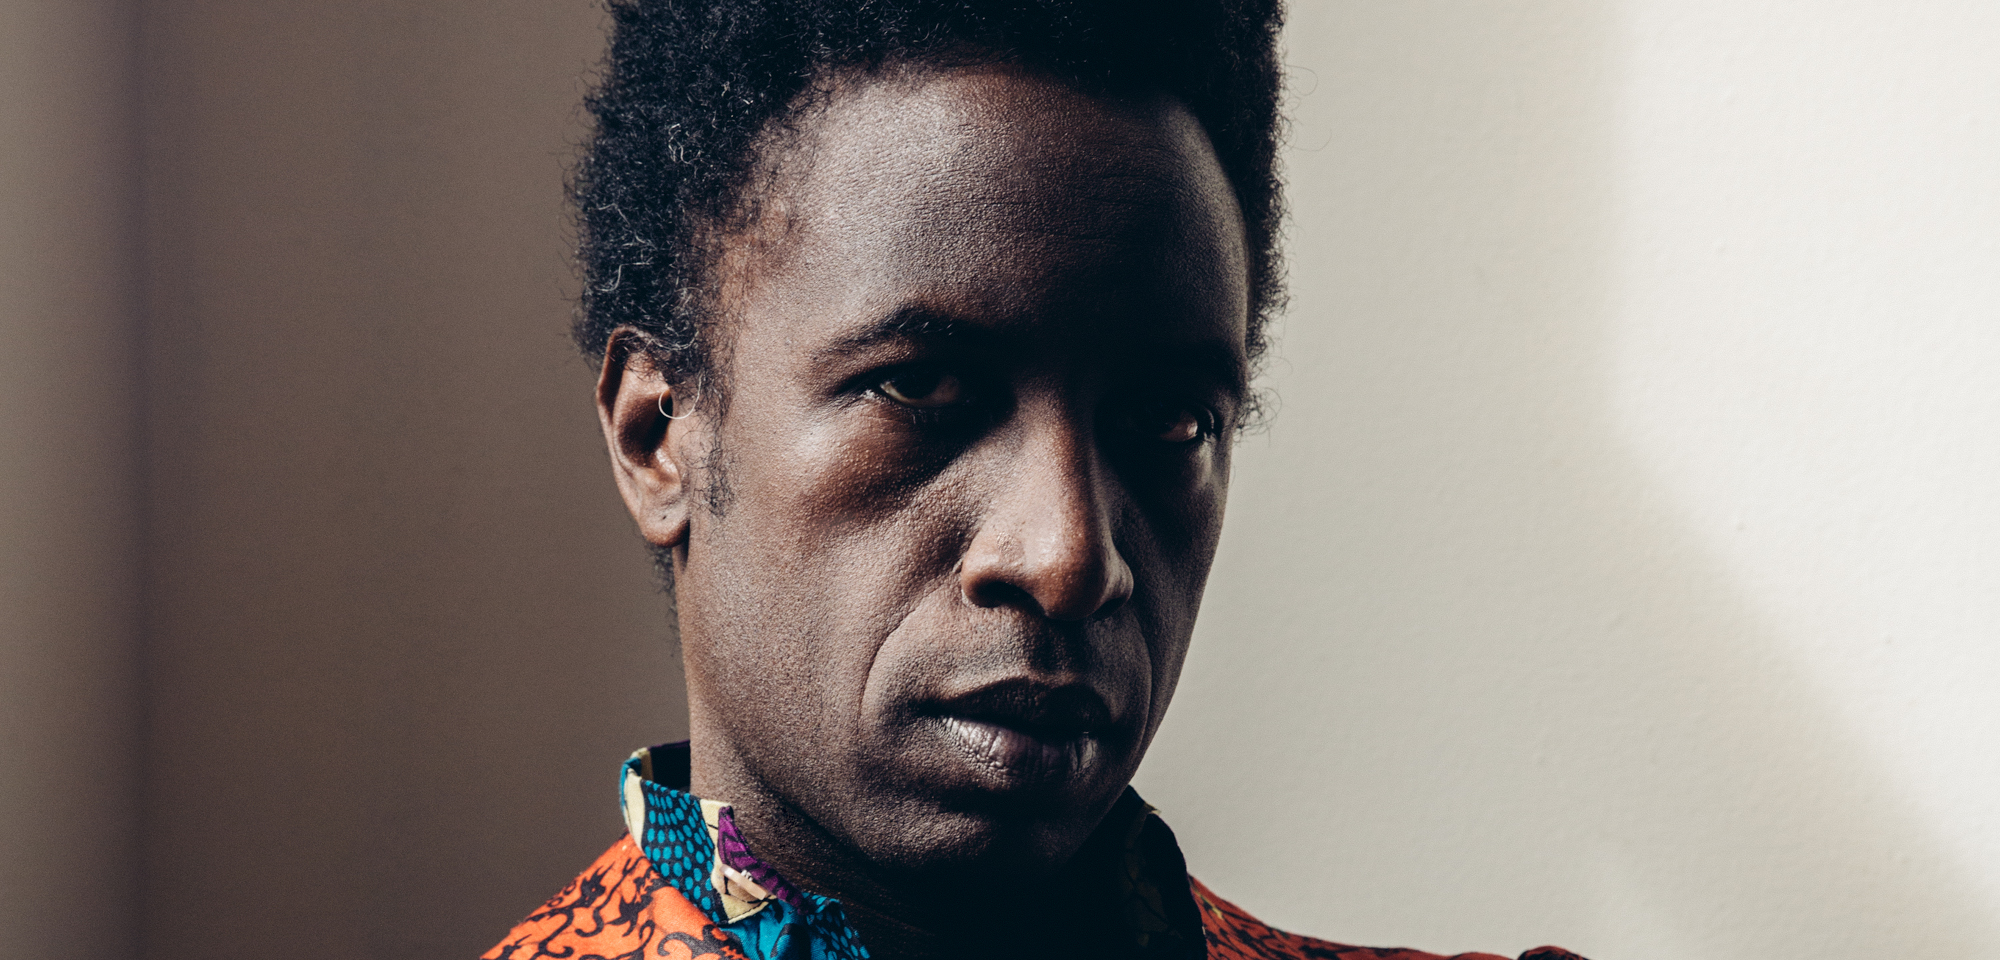 Saul Williams is Making the Work He’s Always Wanted to See in the World